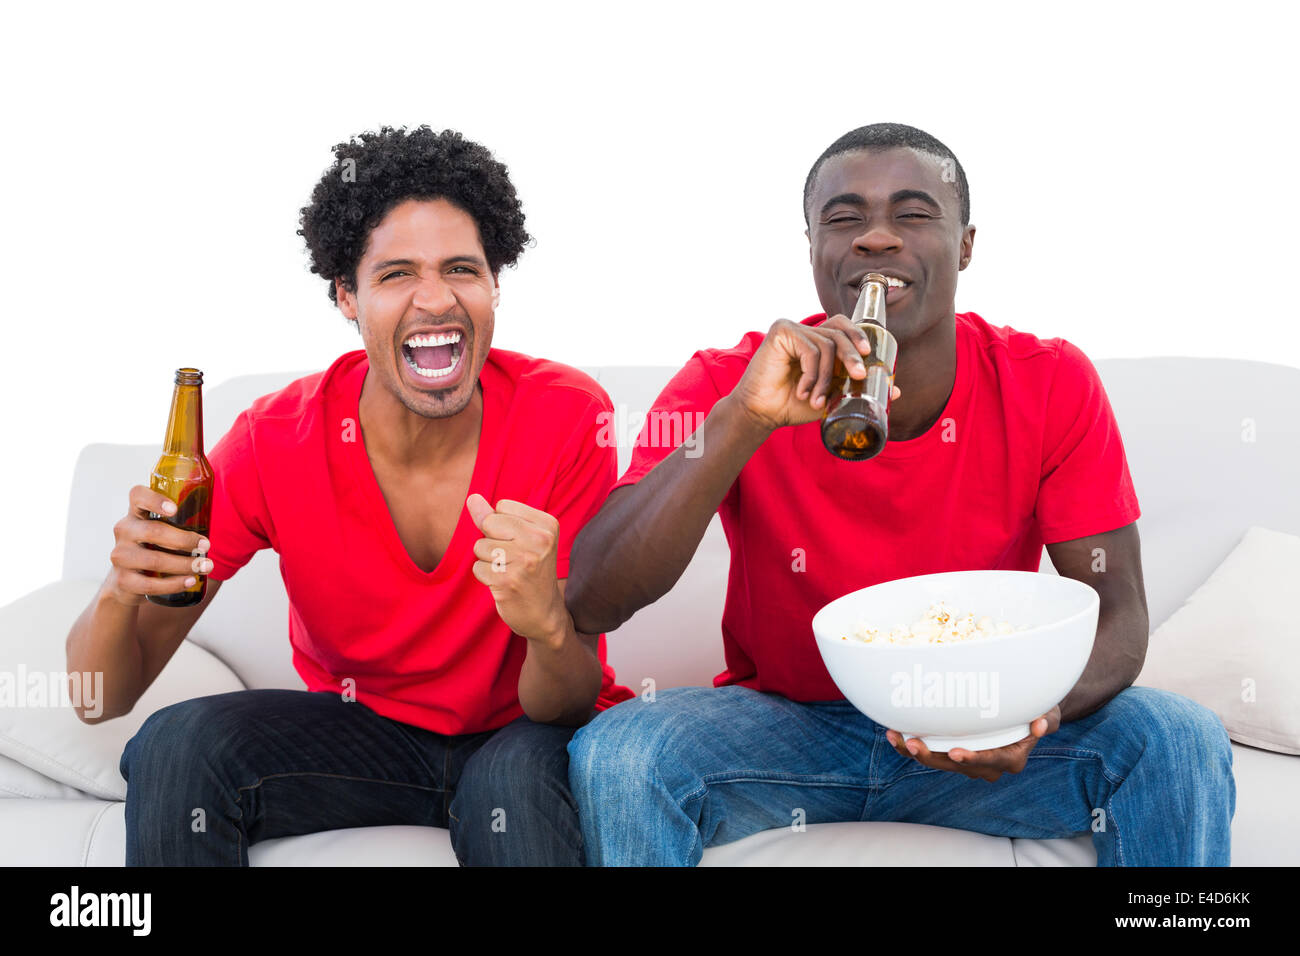 Football fans in red cheering on the sofa with beers and popcorn Stock Photo